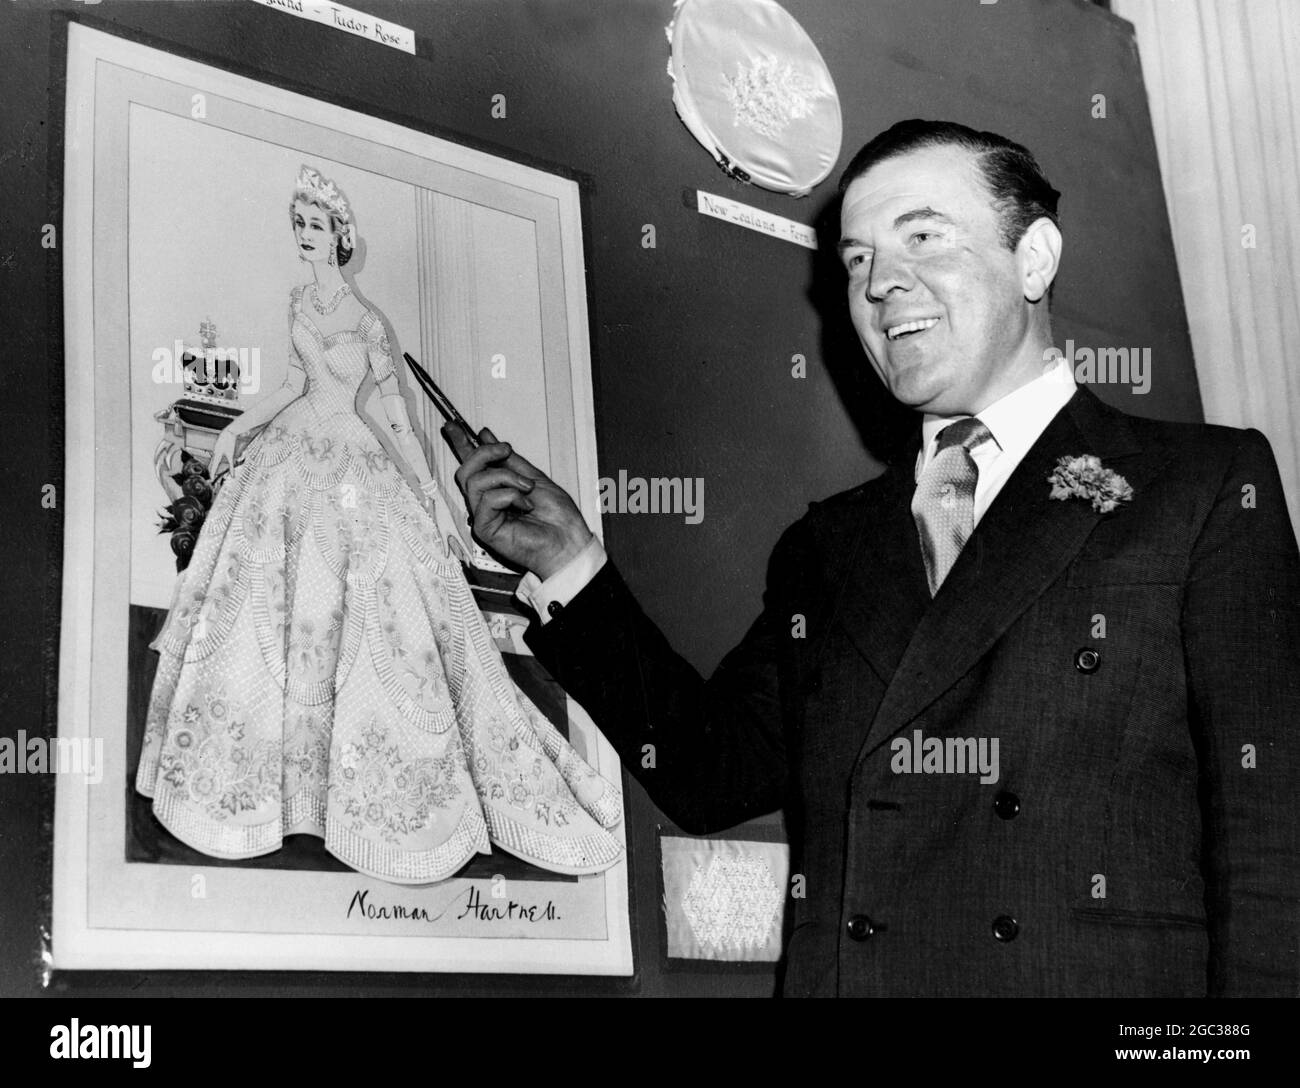 Norman Hartnell seen with his sketch of the Queen's gown to be worn for the coronation, which is in white satin embroidered with the emblem of Britain and the Commonwealth. June 1953 Stock Photo